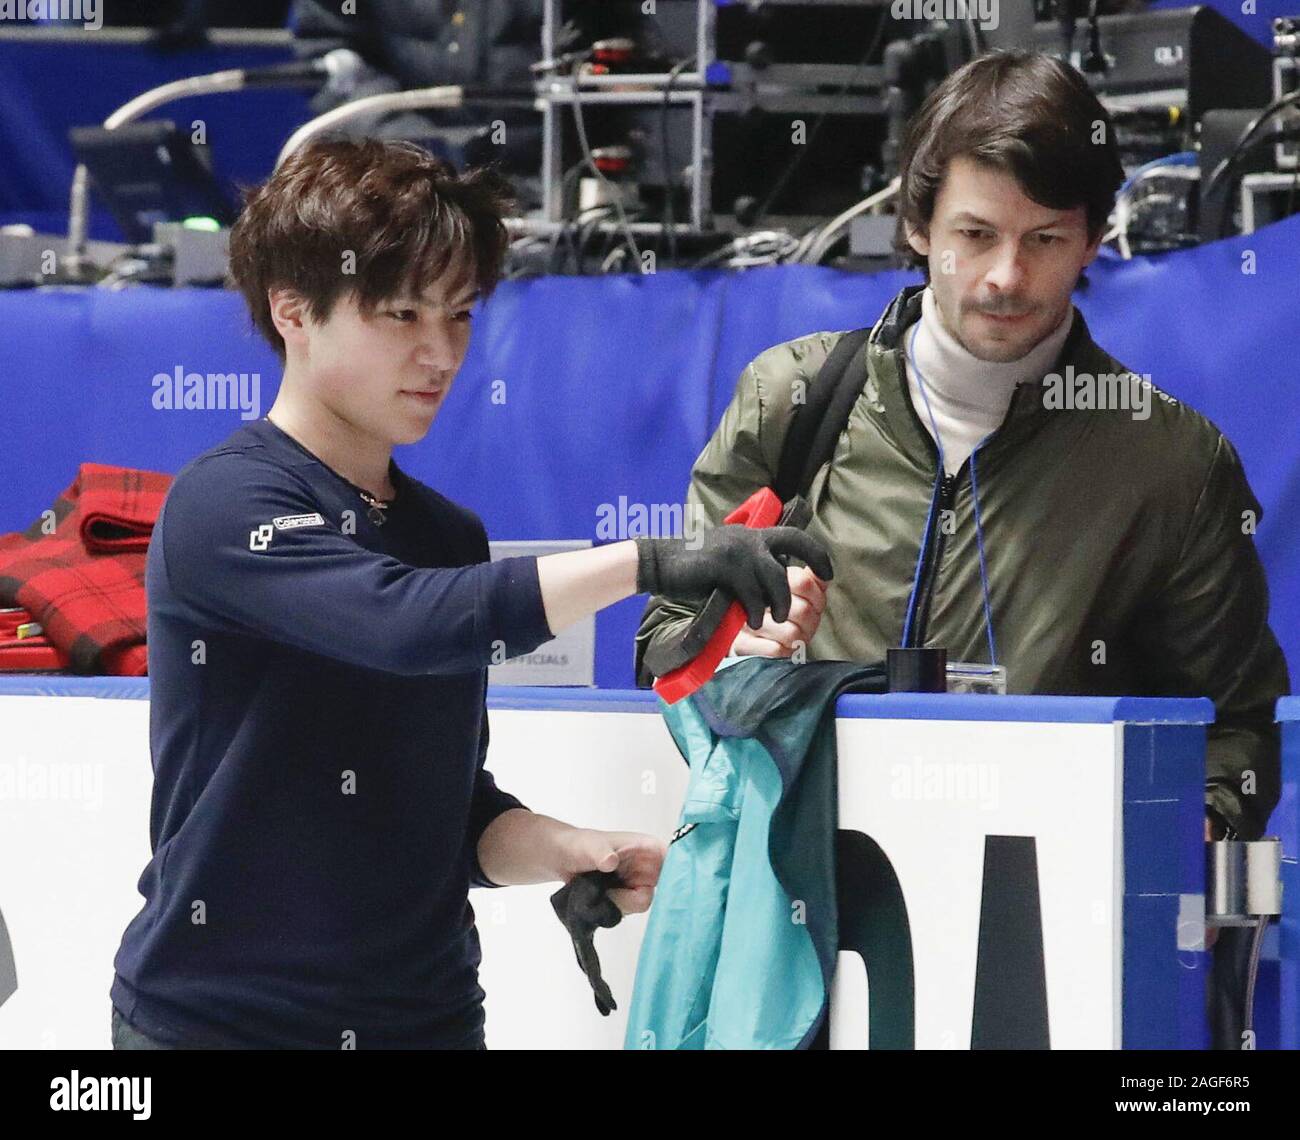 Japanese figure skater Shoma Uno (L) and Turin Olympic silver medalist  Stephane Lambiel of Switzerland are pictured after Uno took part in  official practice for the national championships in Tokyo on Dec.